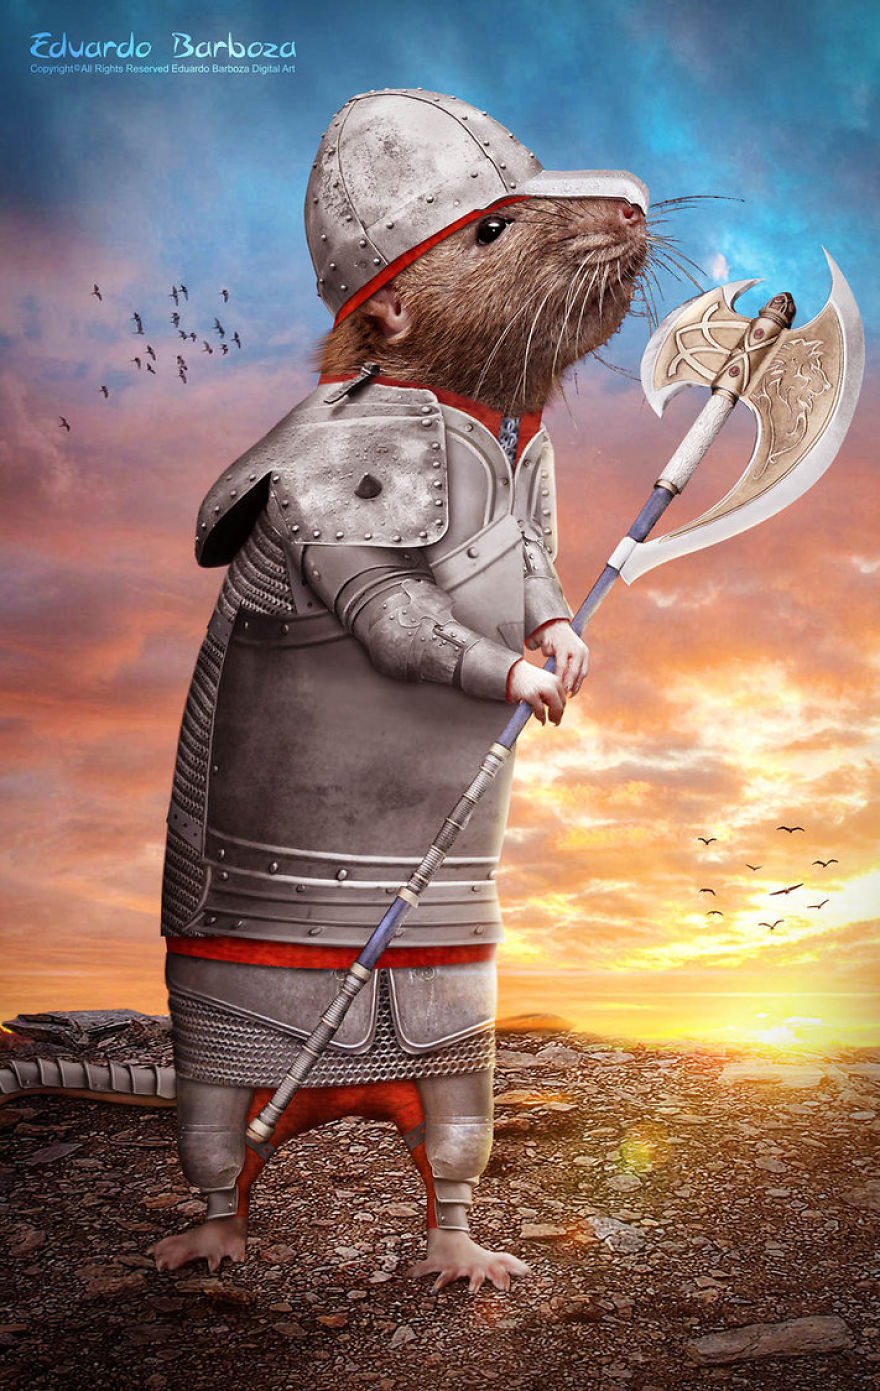 Artists Photoshop Armor On Animals To Bring Awareness To Endangered Species